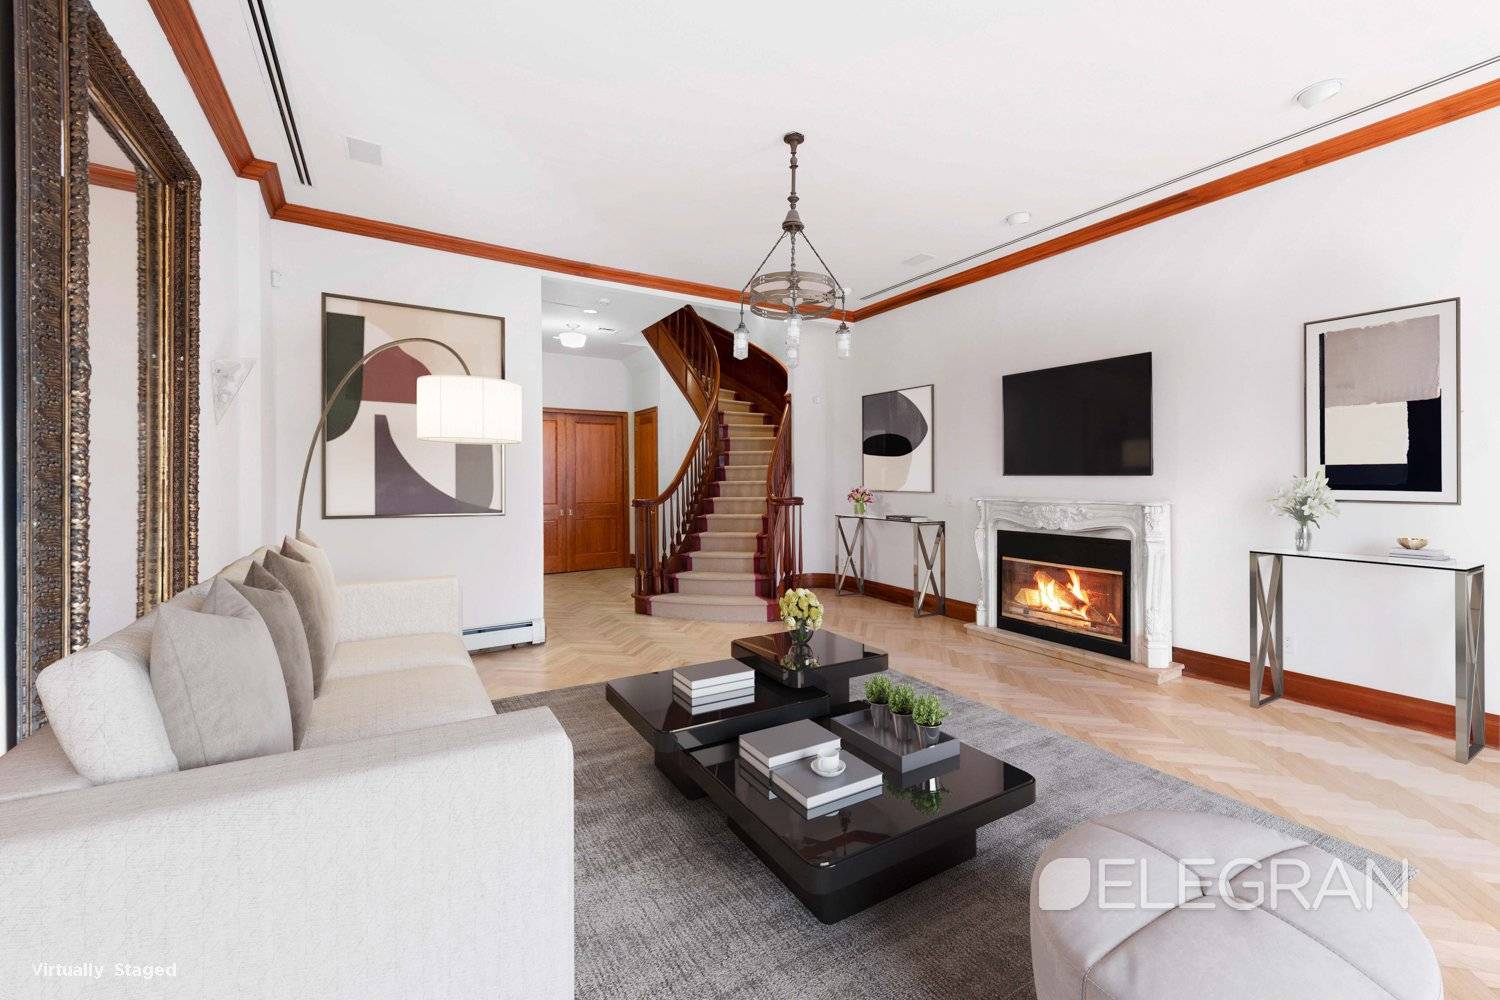 Set on a large lot just steps from the exclusive Park Avenue is this superb five story townhouse that has been impeccably renovated.